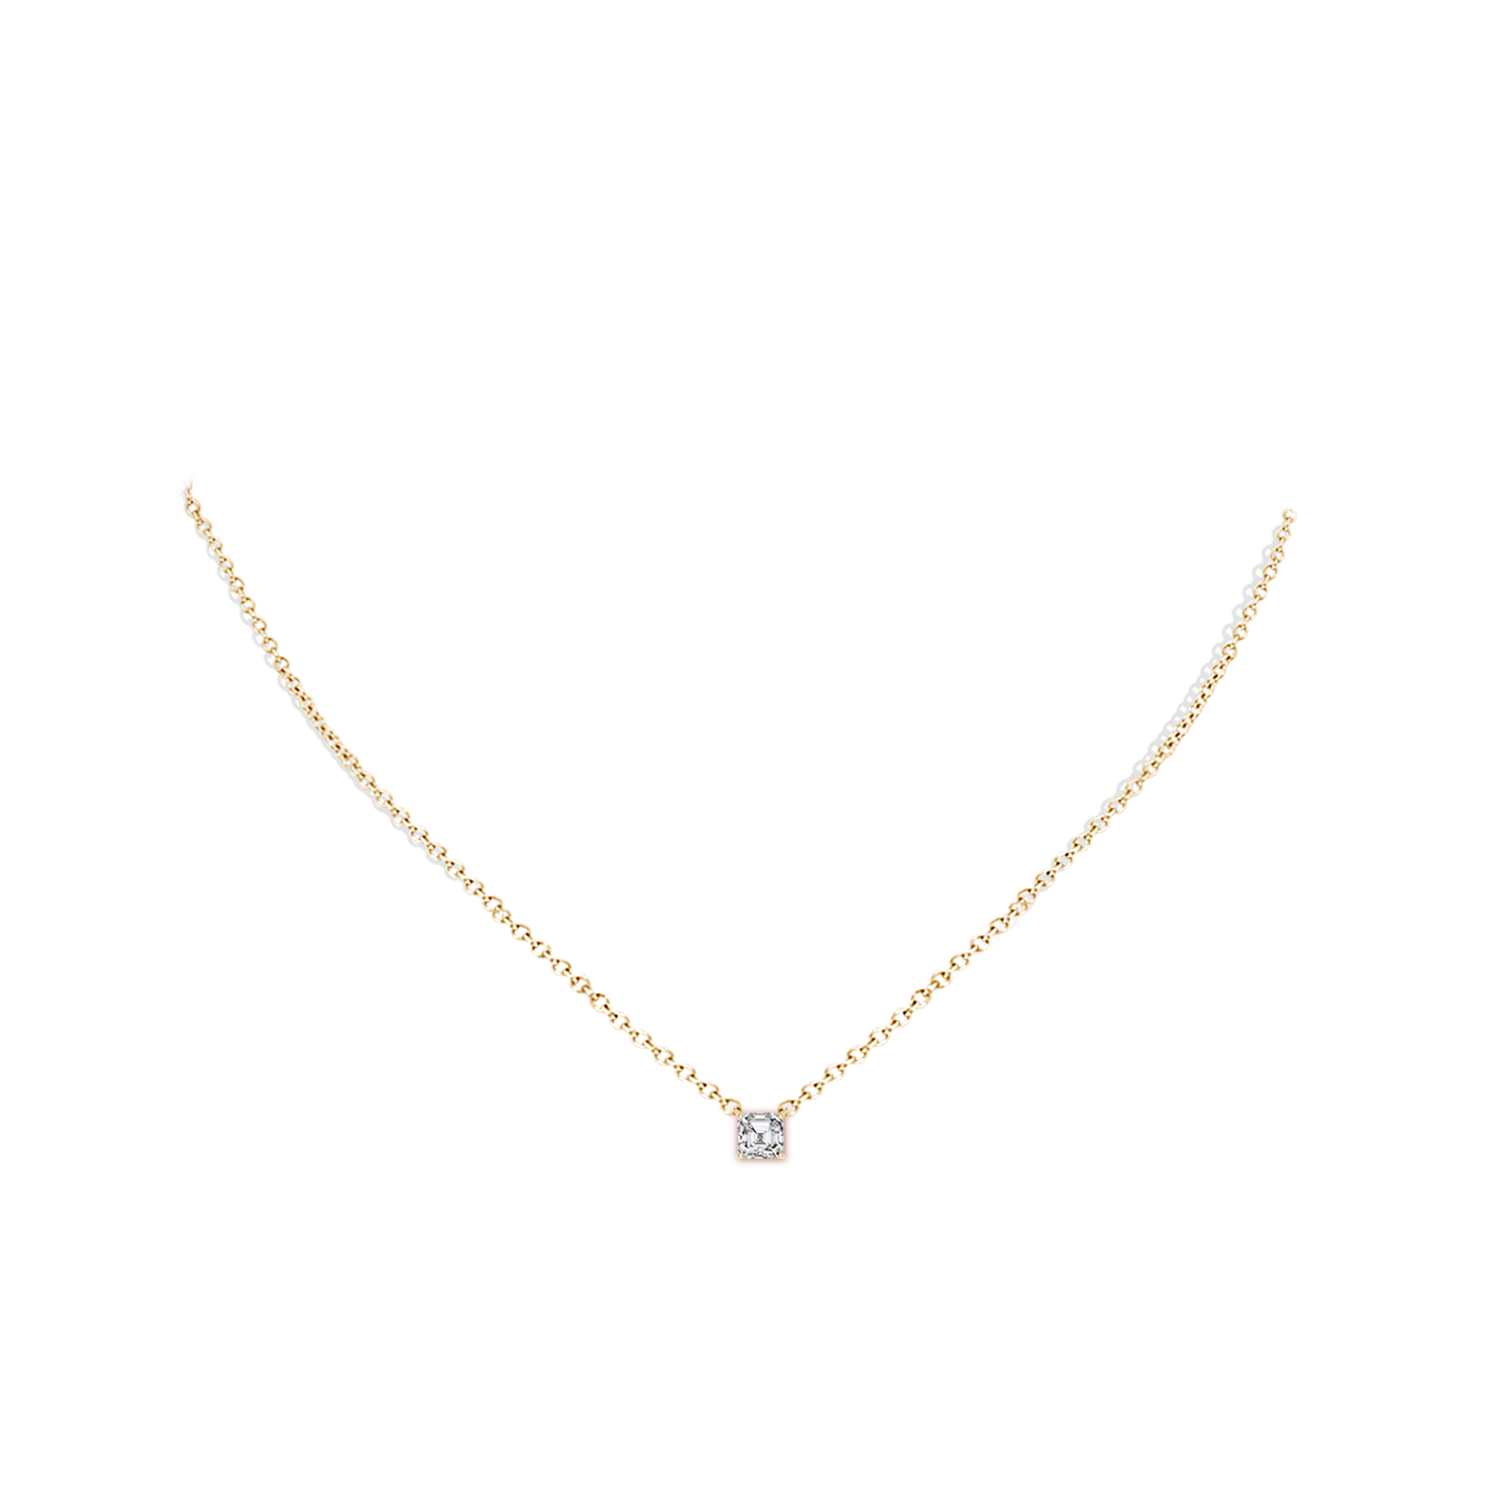 H, SI2 / 2 CT / 18 KT Yellow Gold